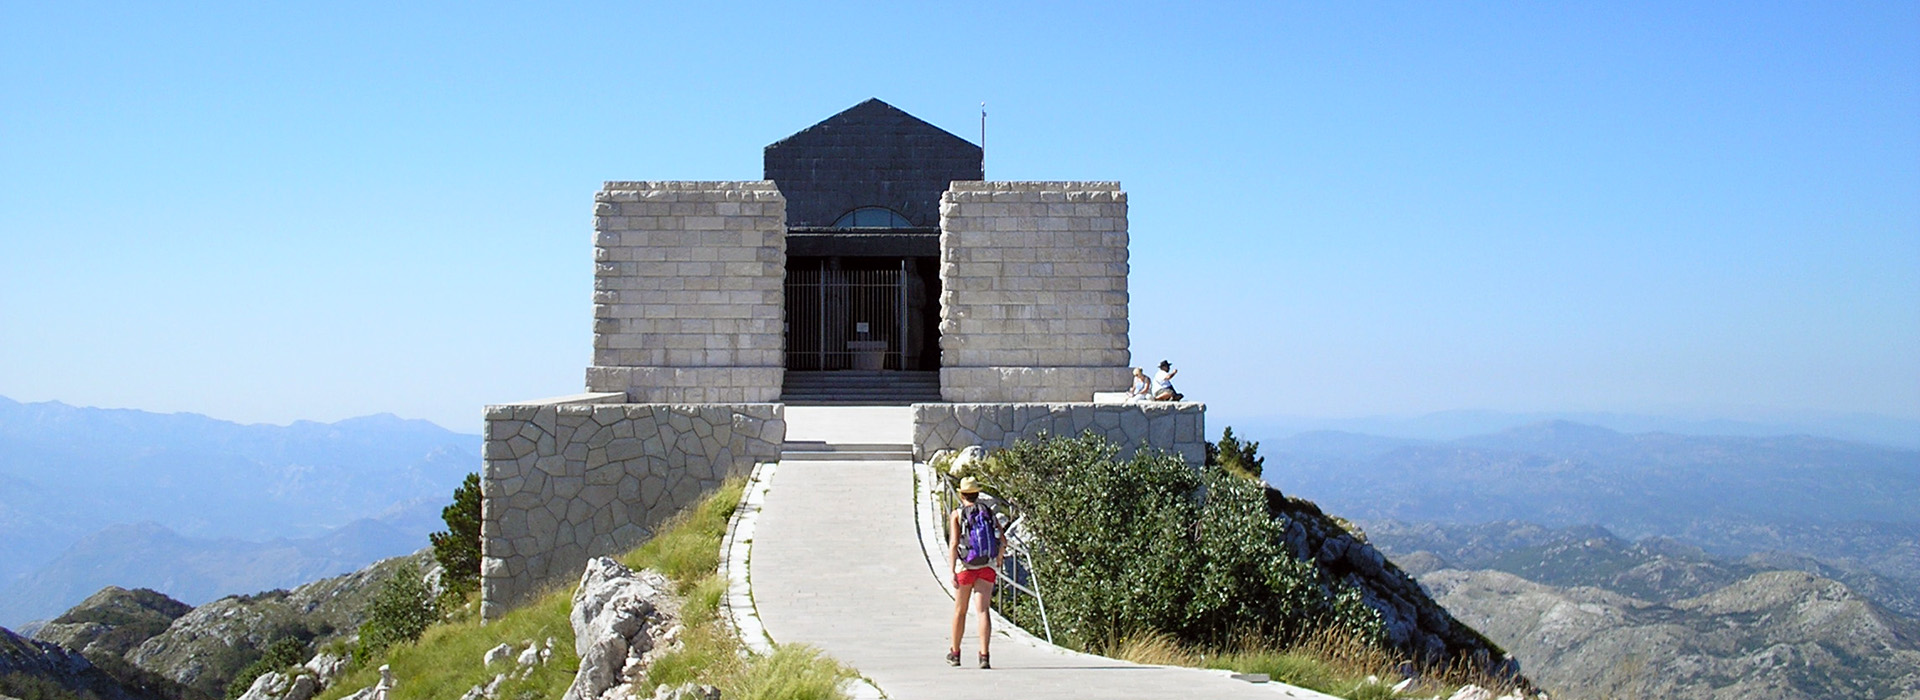 Montenegro and Croatia Self-Guided Walking Holiday - Lovcen